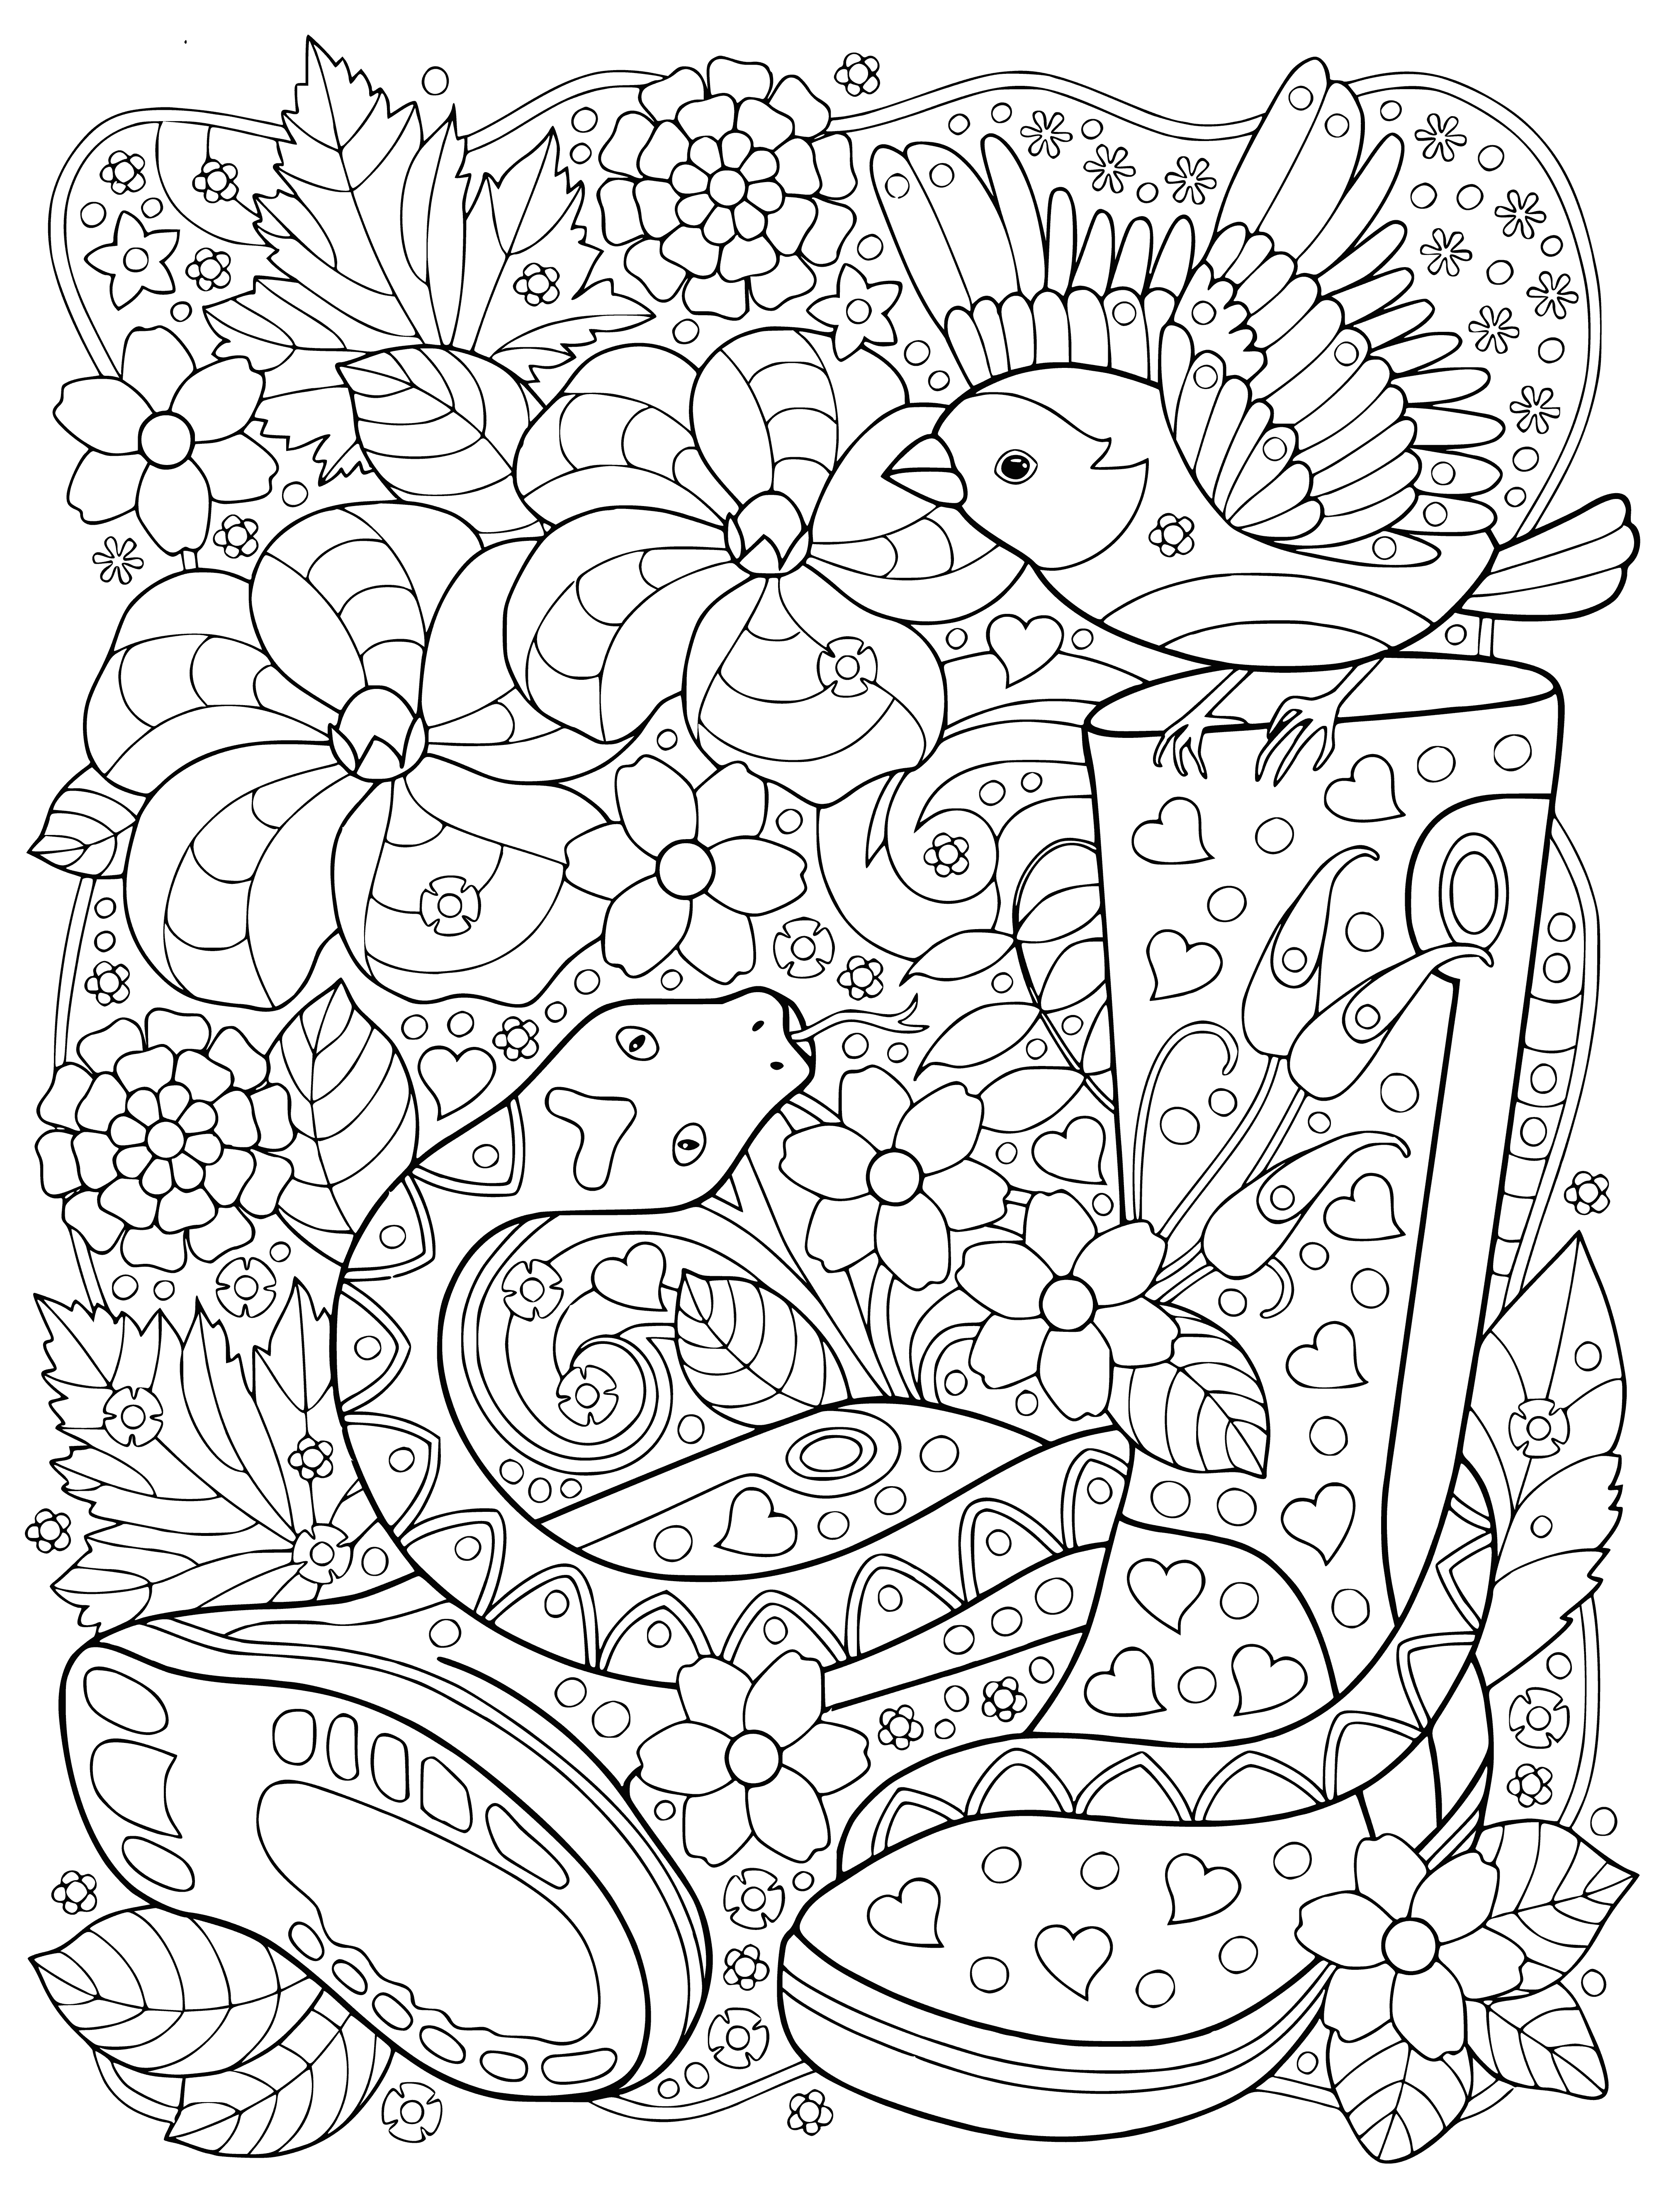 Bird and snake coloring page